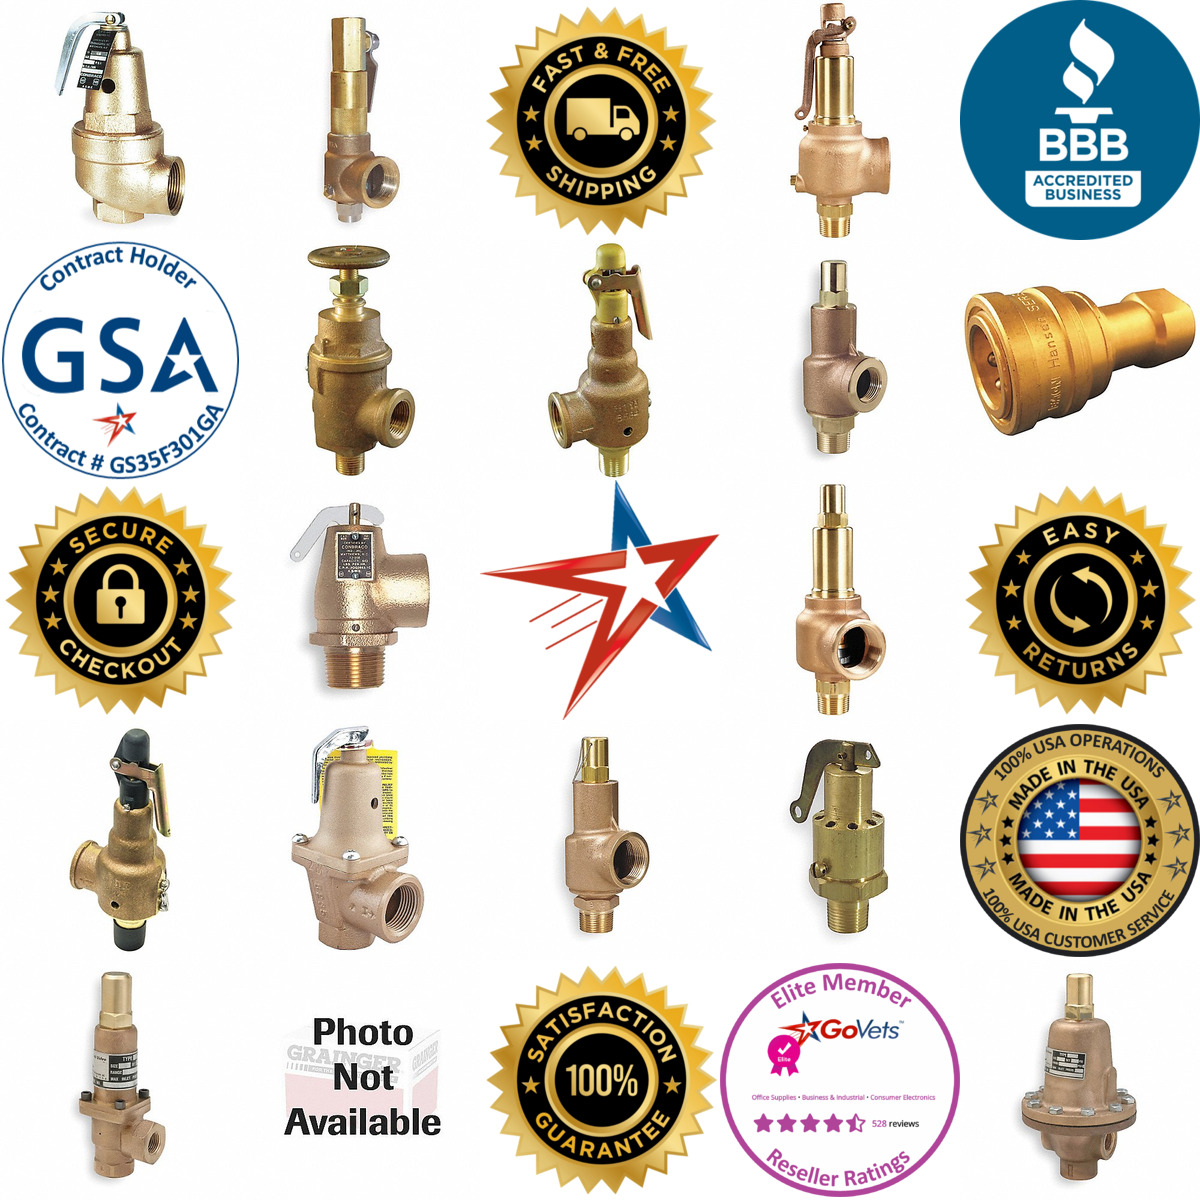 A selection of Relief Valves products on GoVets